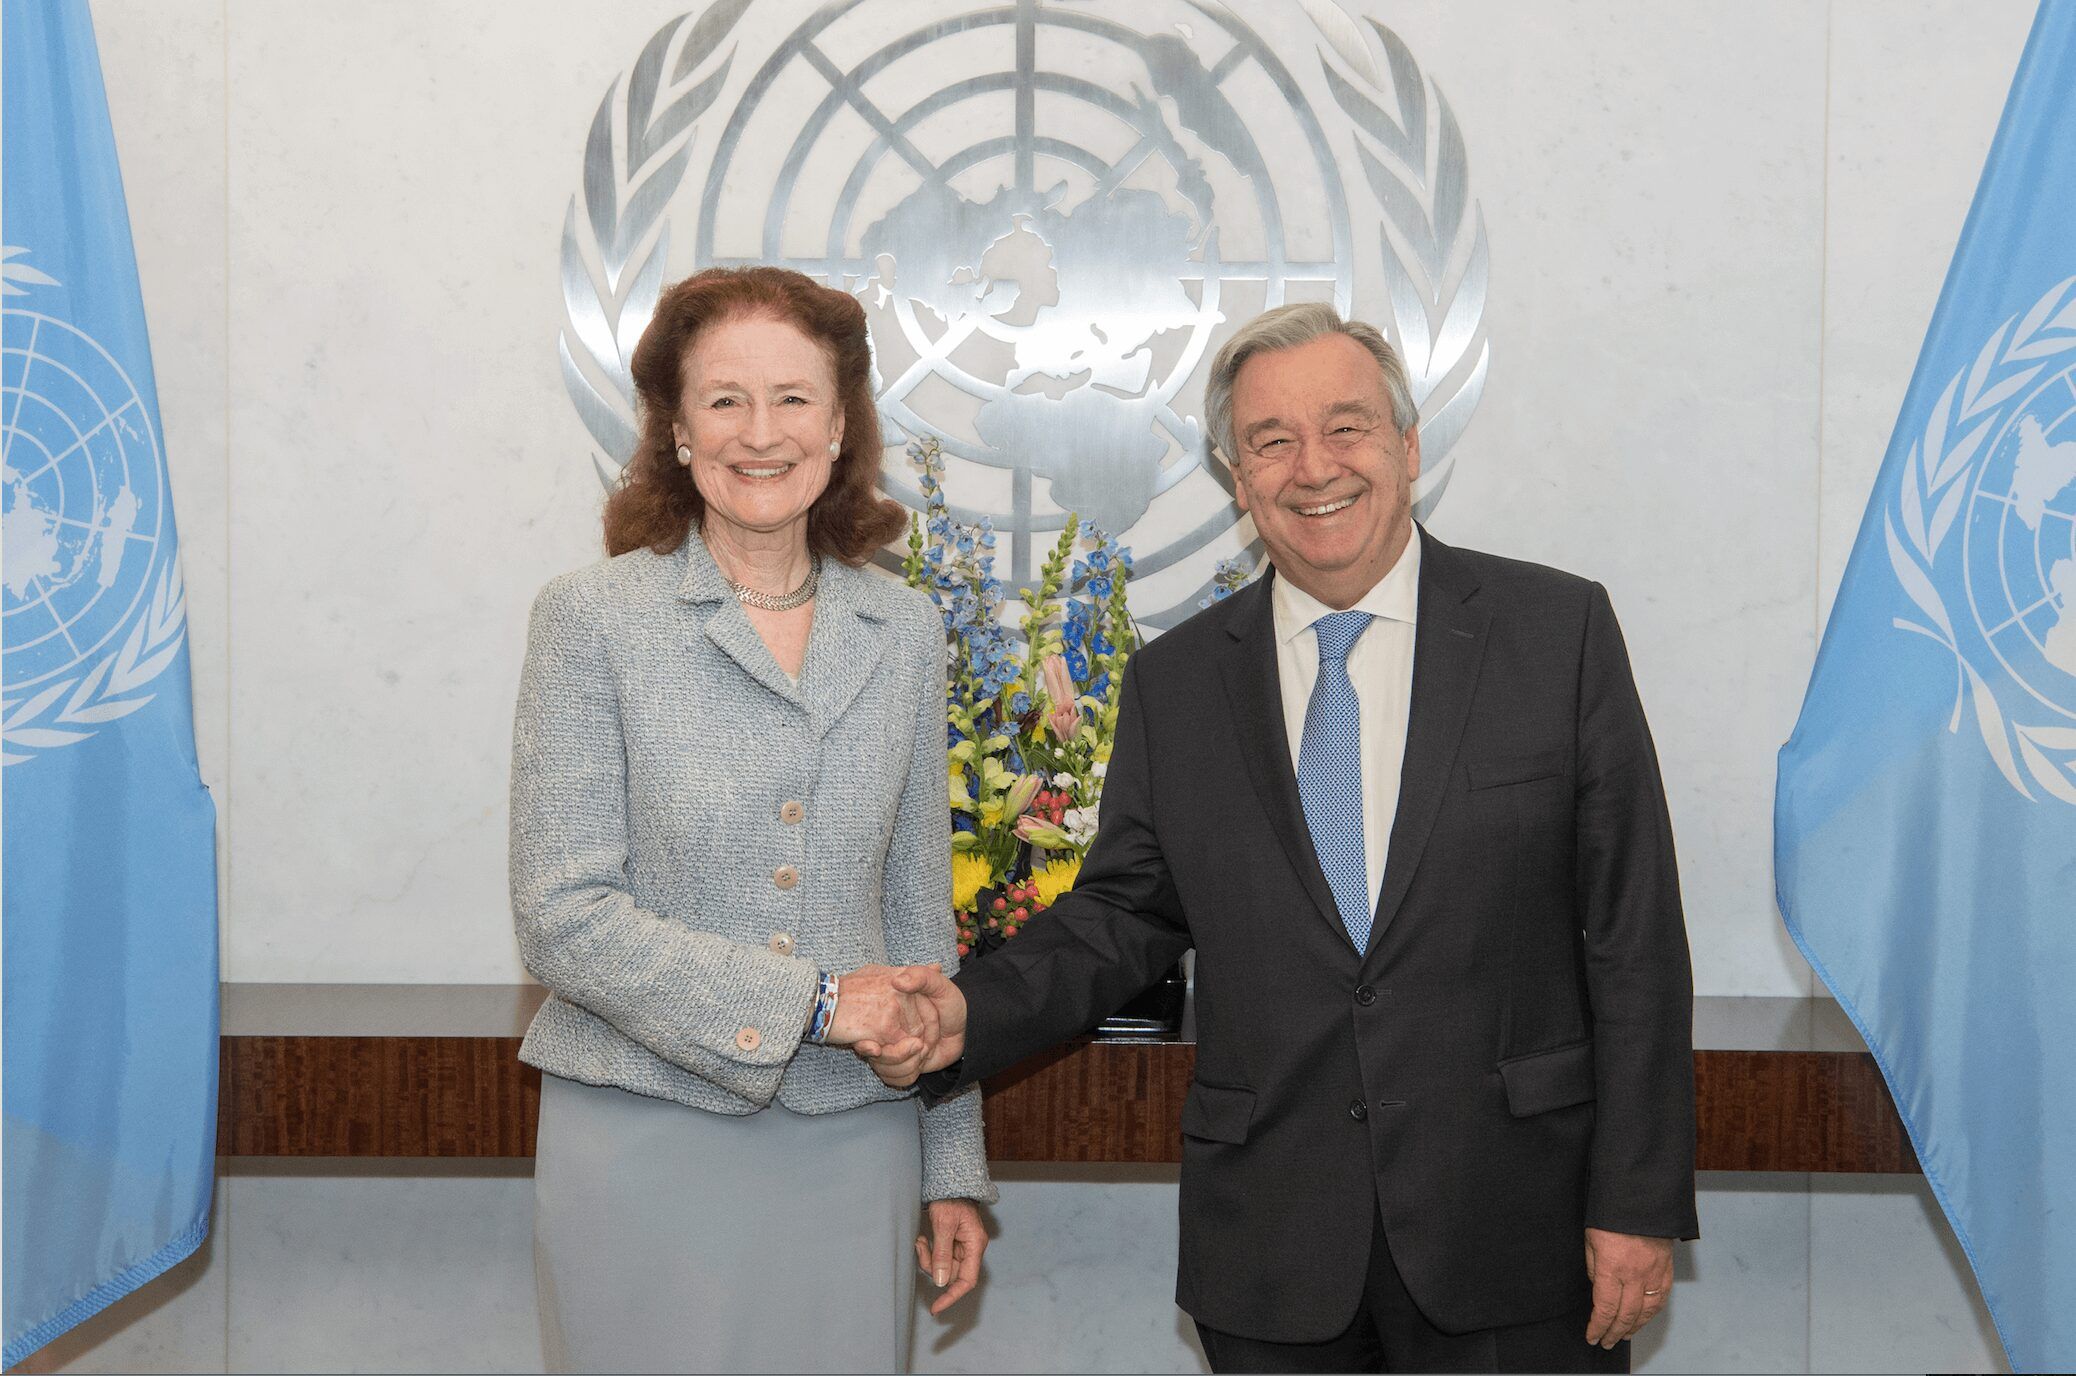 Man and woman shaking hands in front of UN emblem